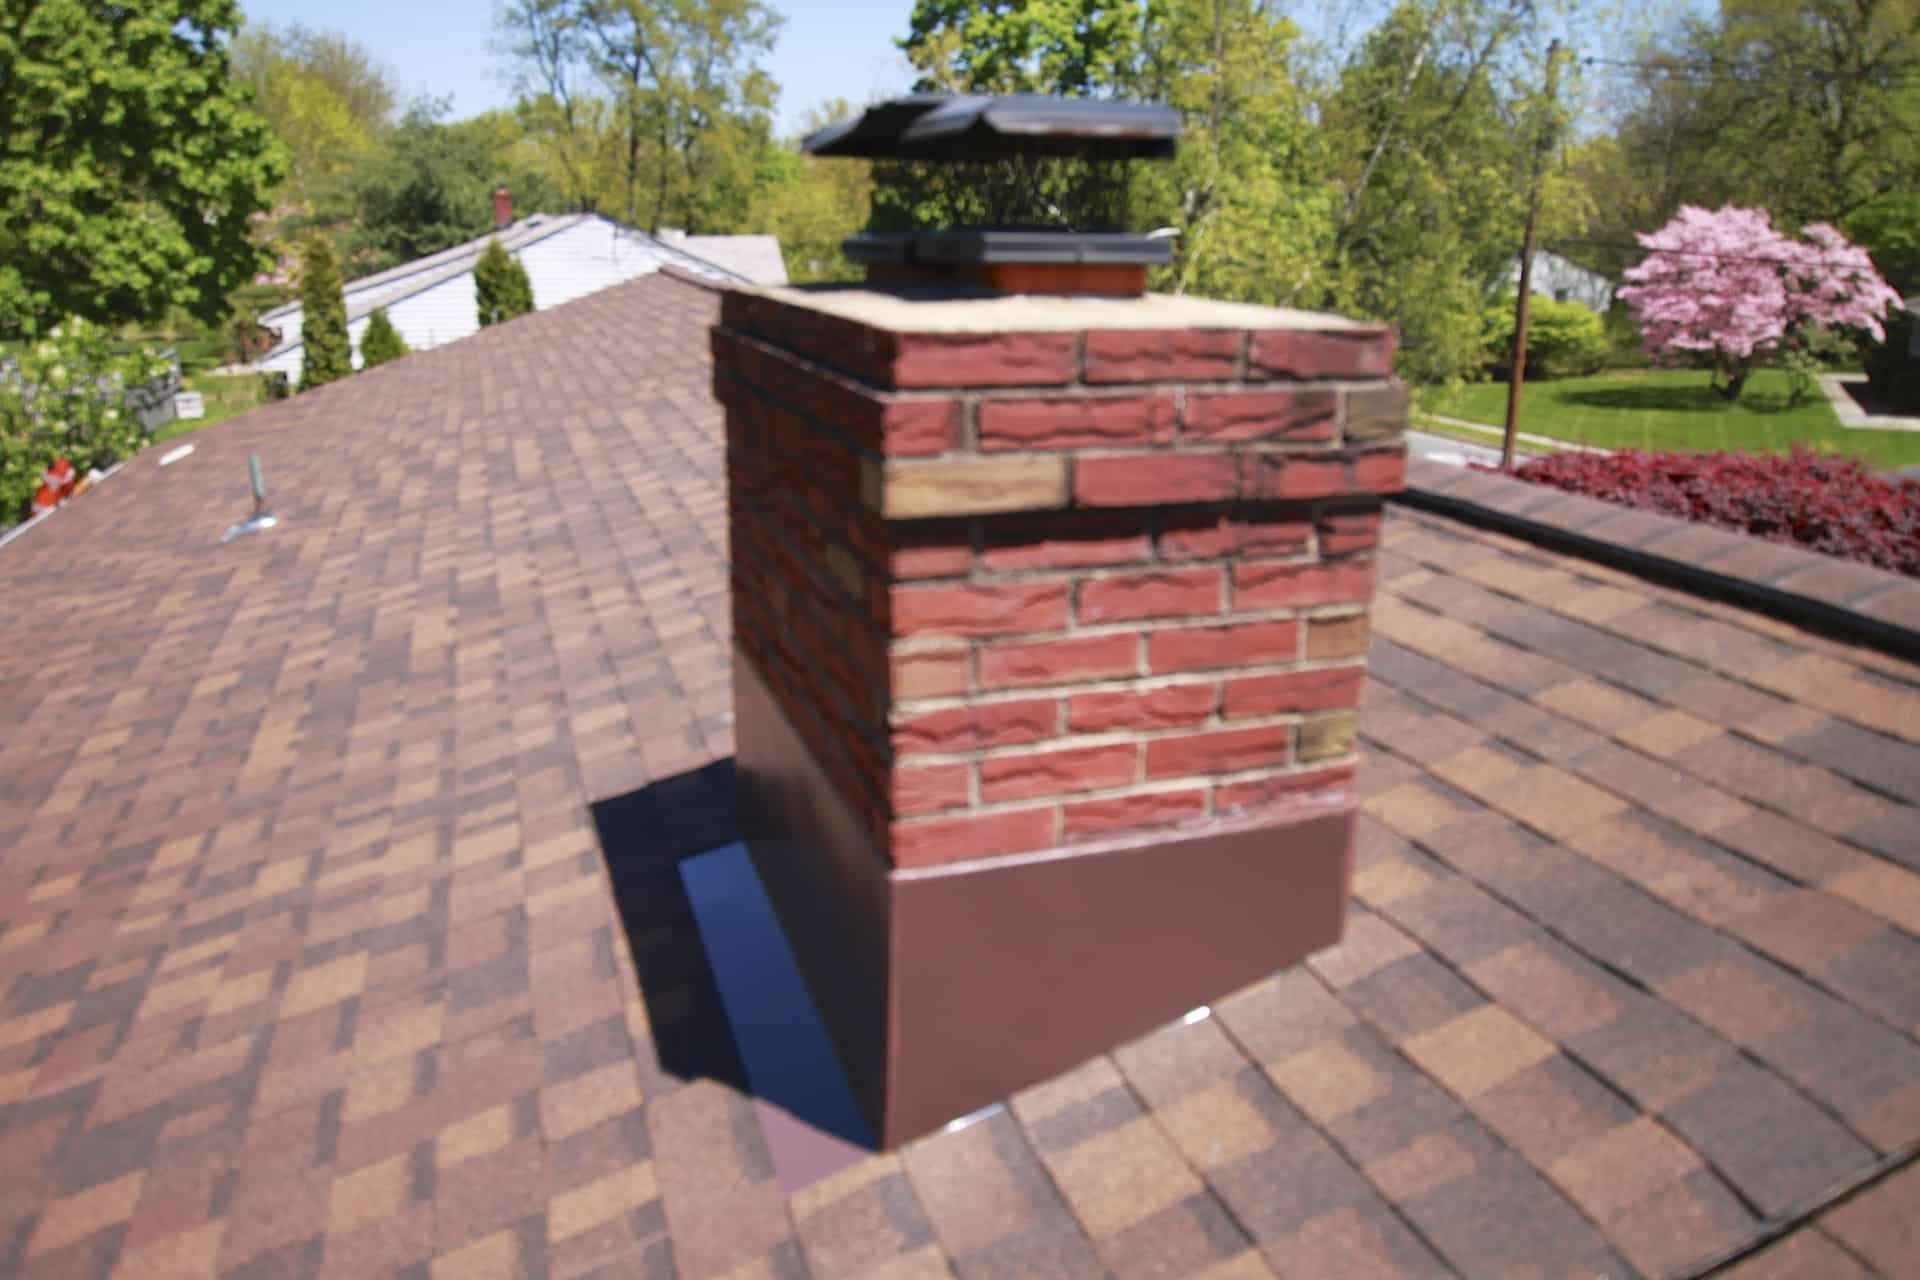 A brick chimney with newly installed brown colored flashing